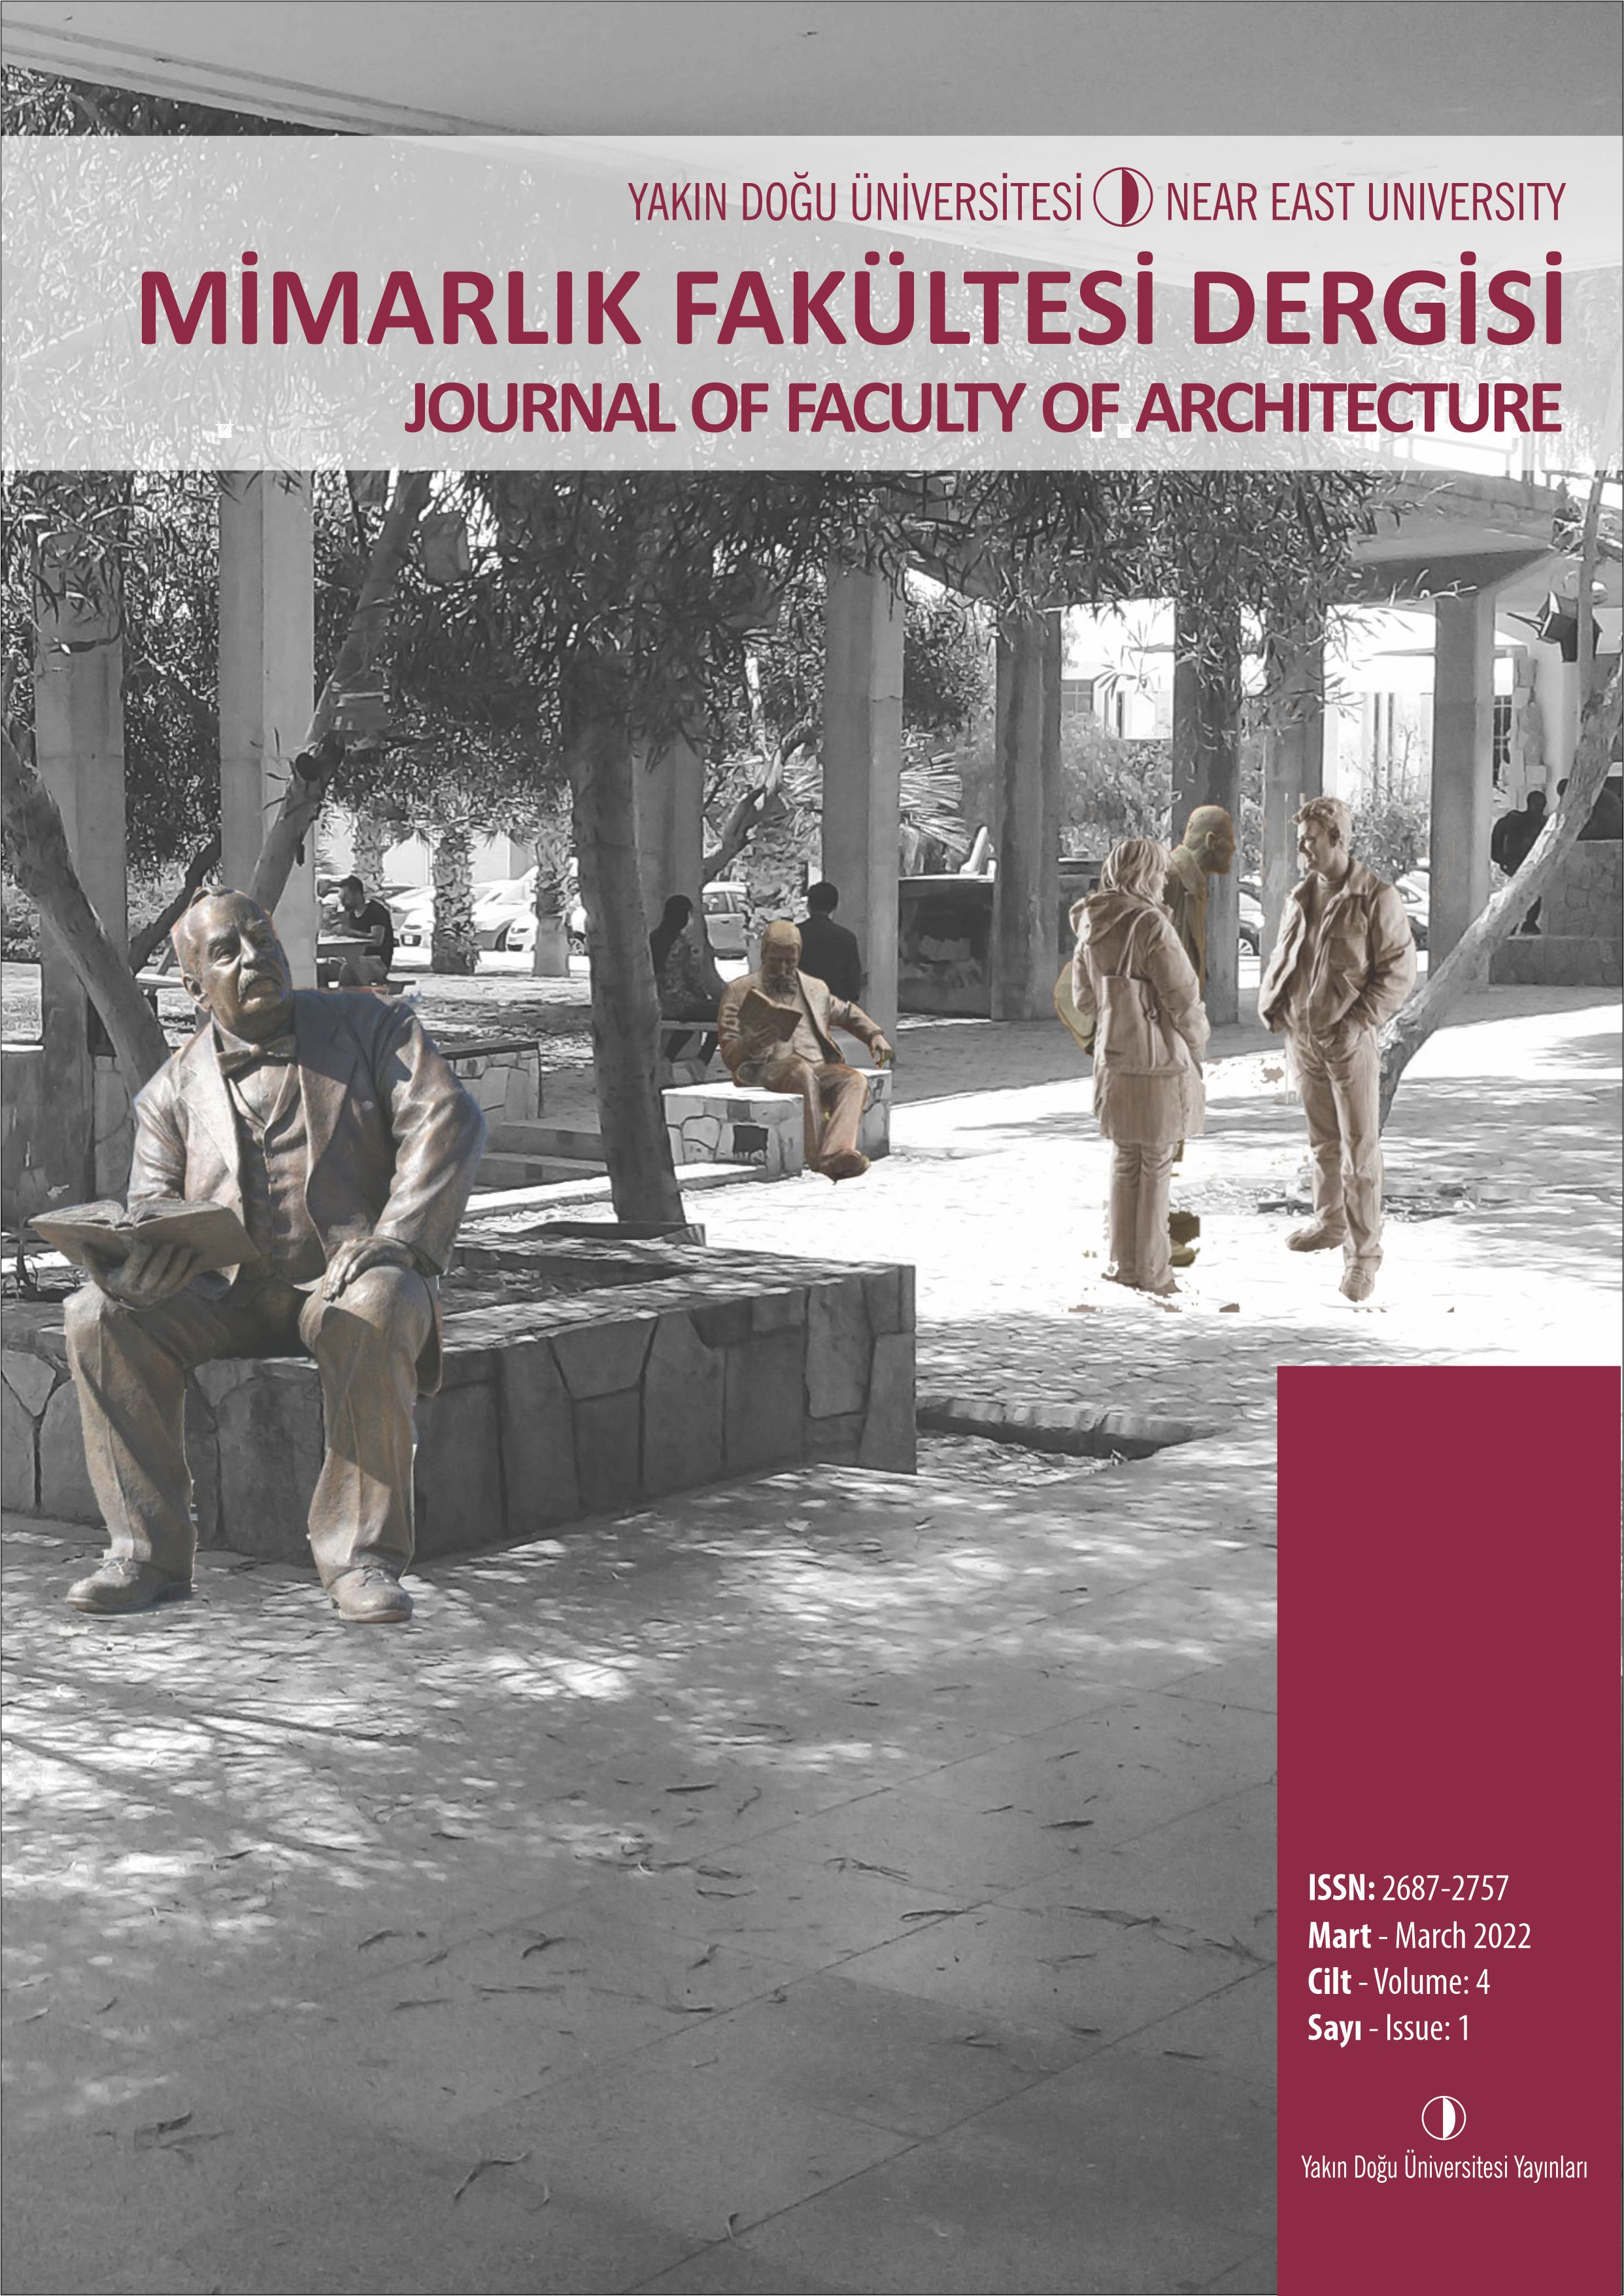 					View Vol. 4 No. 1 (2022): Journal of Faculty of Architecture
				